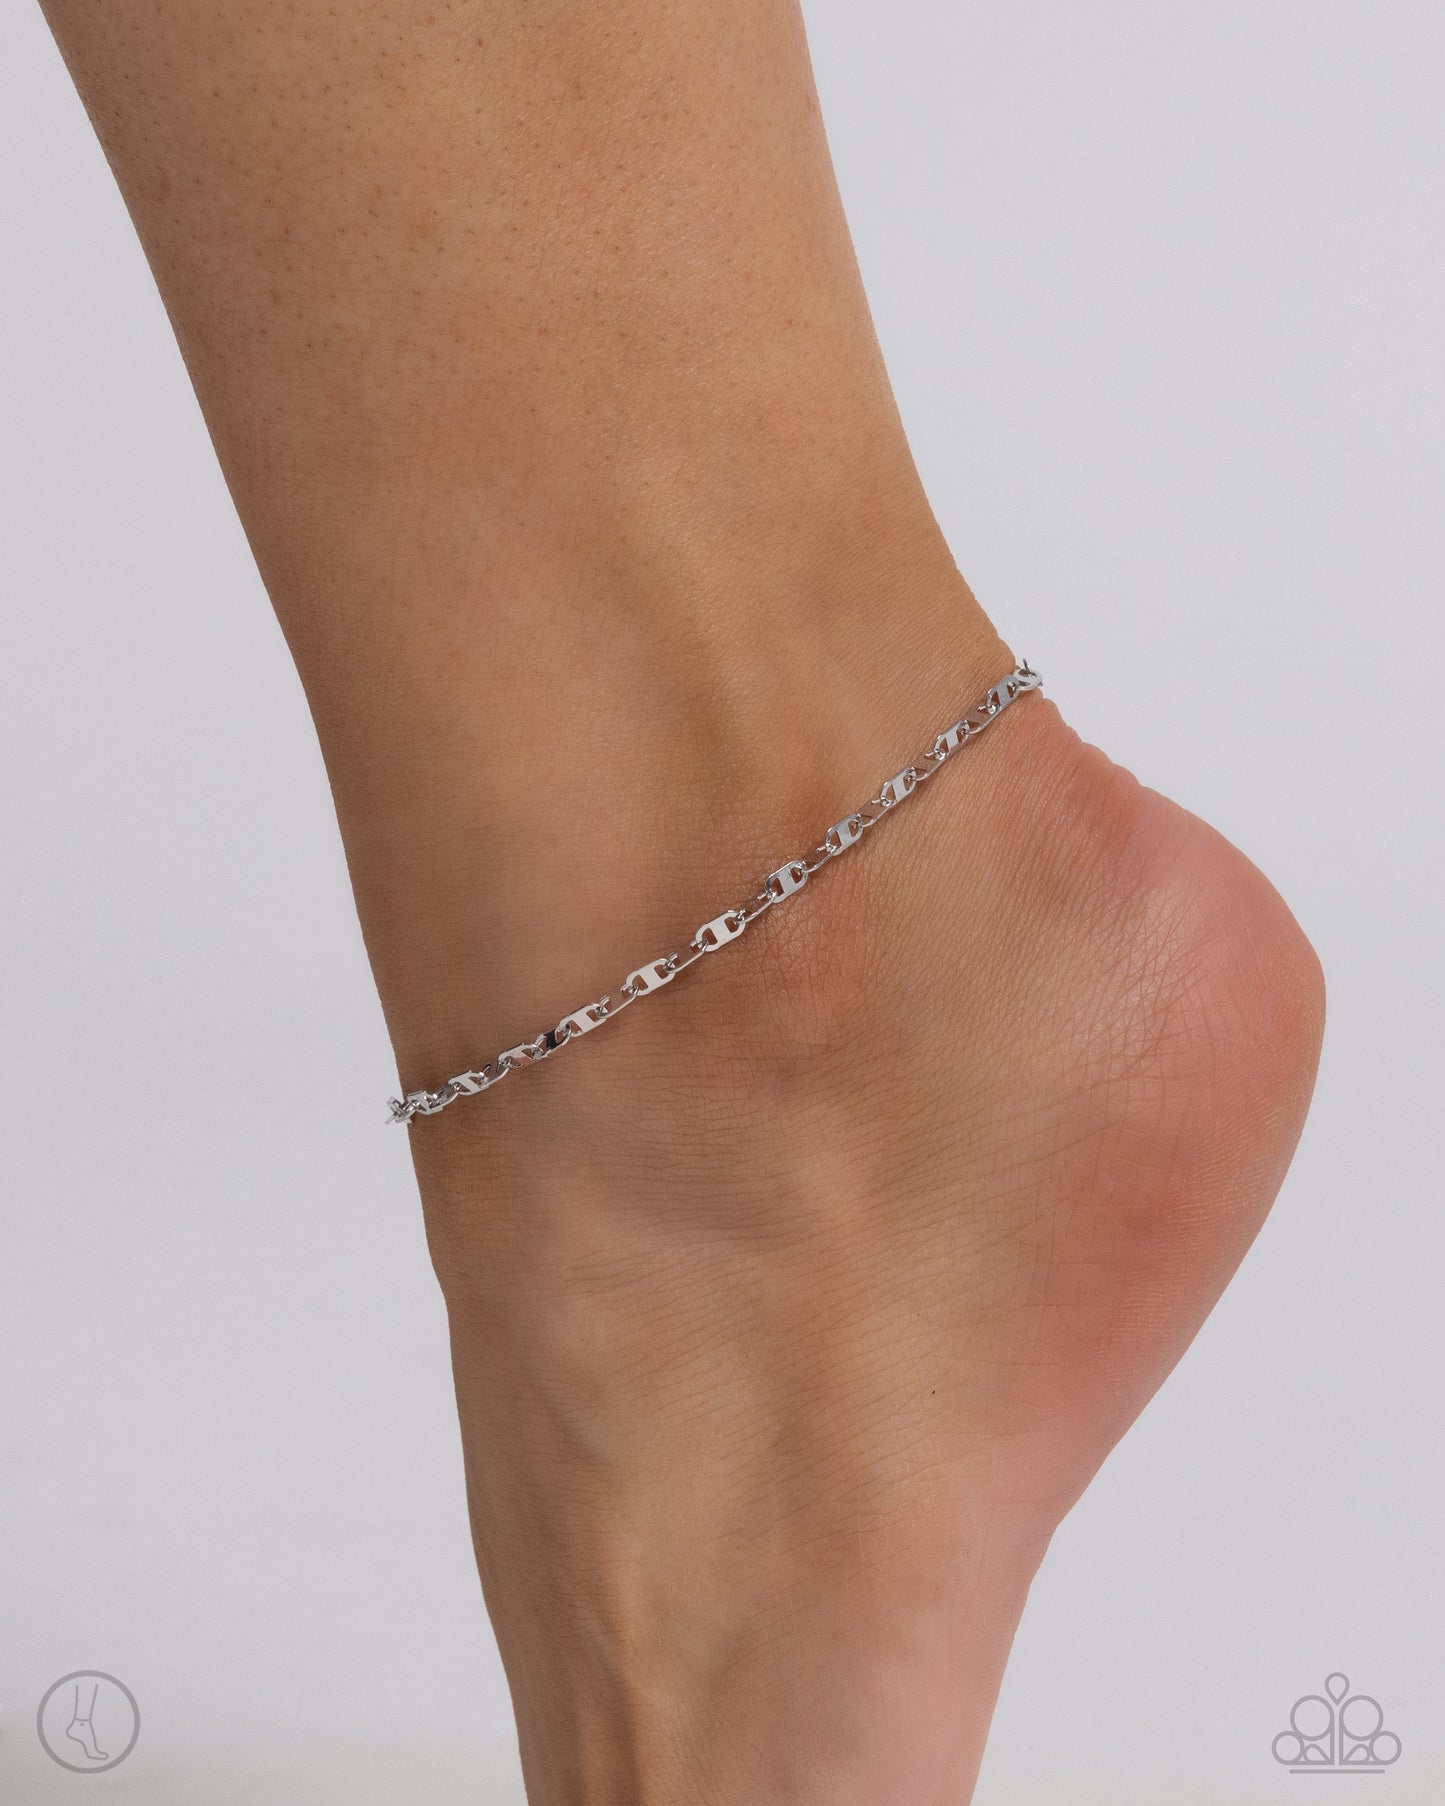 Paparazzi Anklets - Linked Legacy - Silver